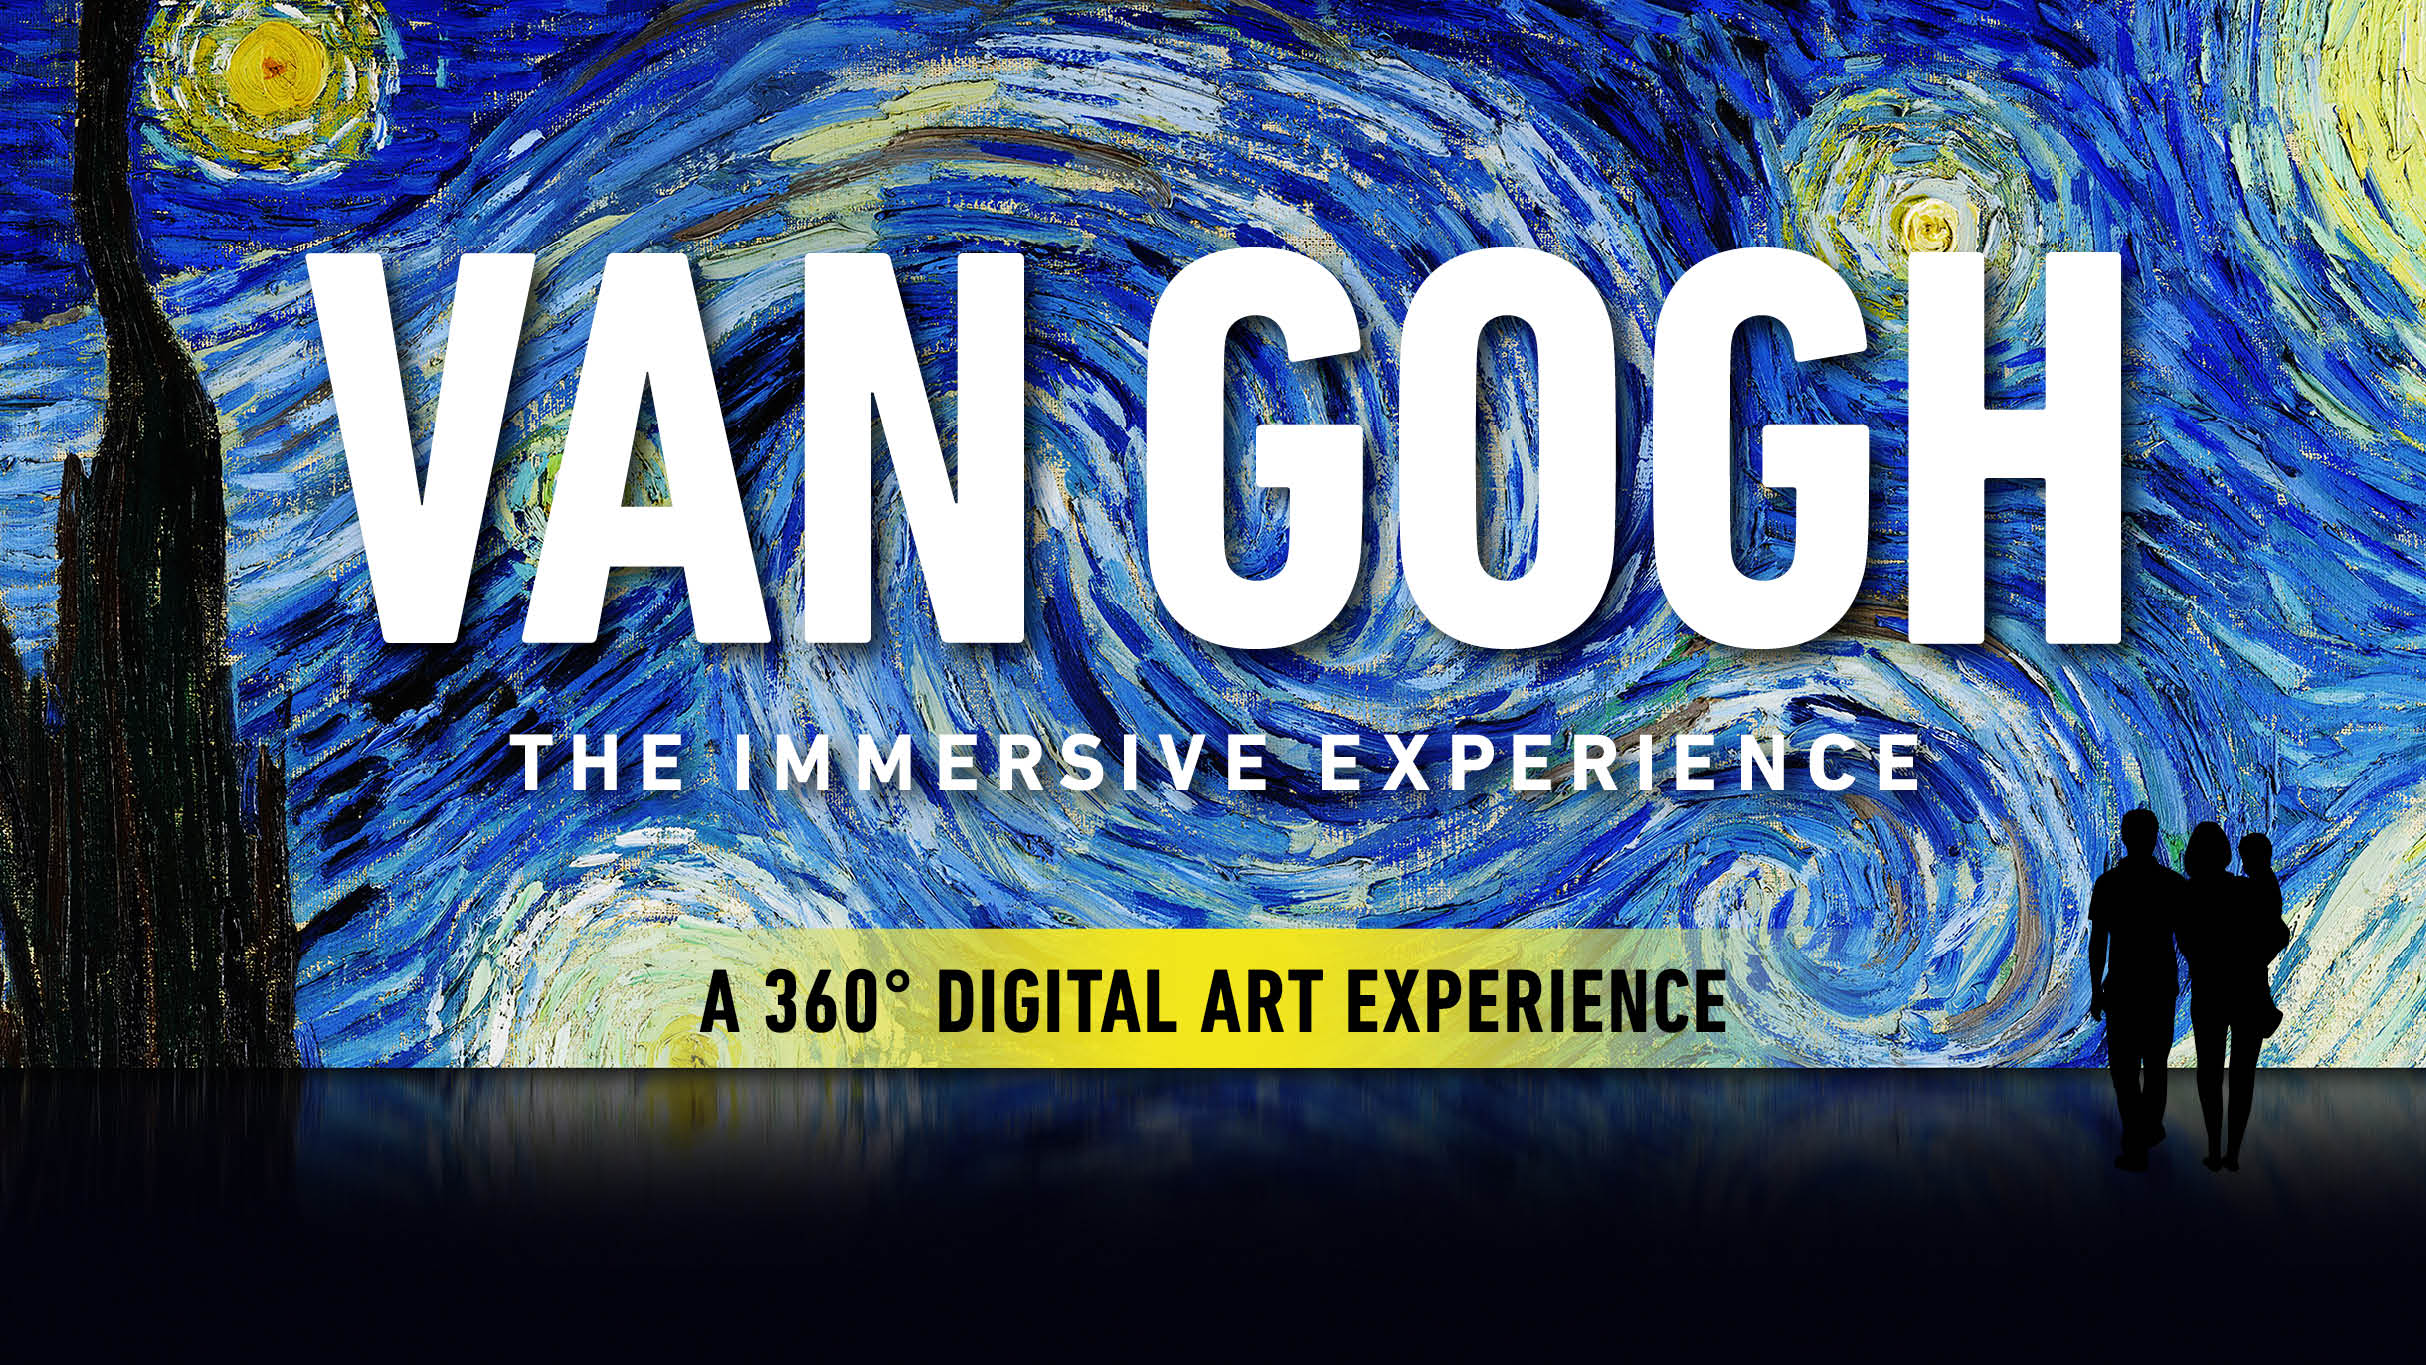 Image name Van Gogh The Immersive Experience at York St Marys York the 1 image from the post Events in Yorkshire.com.